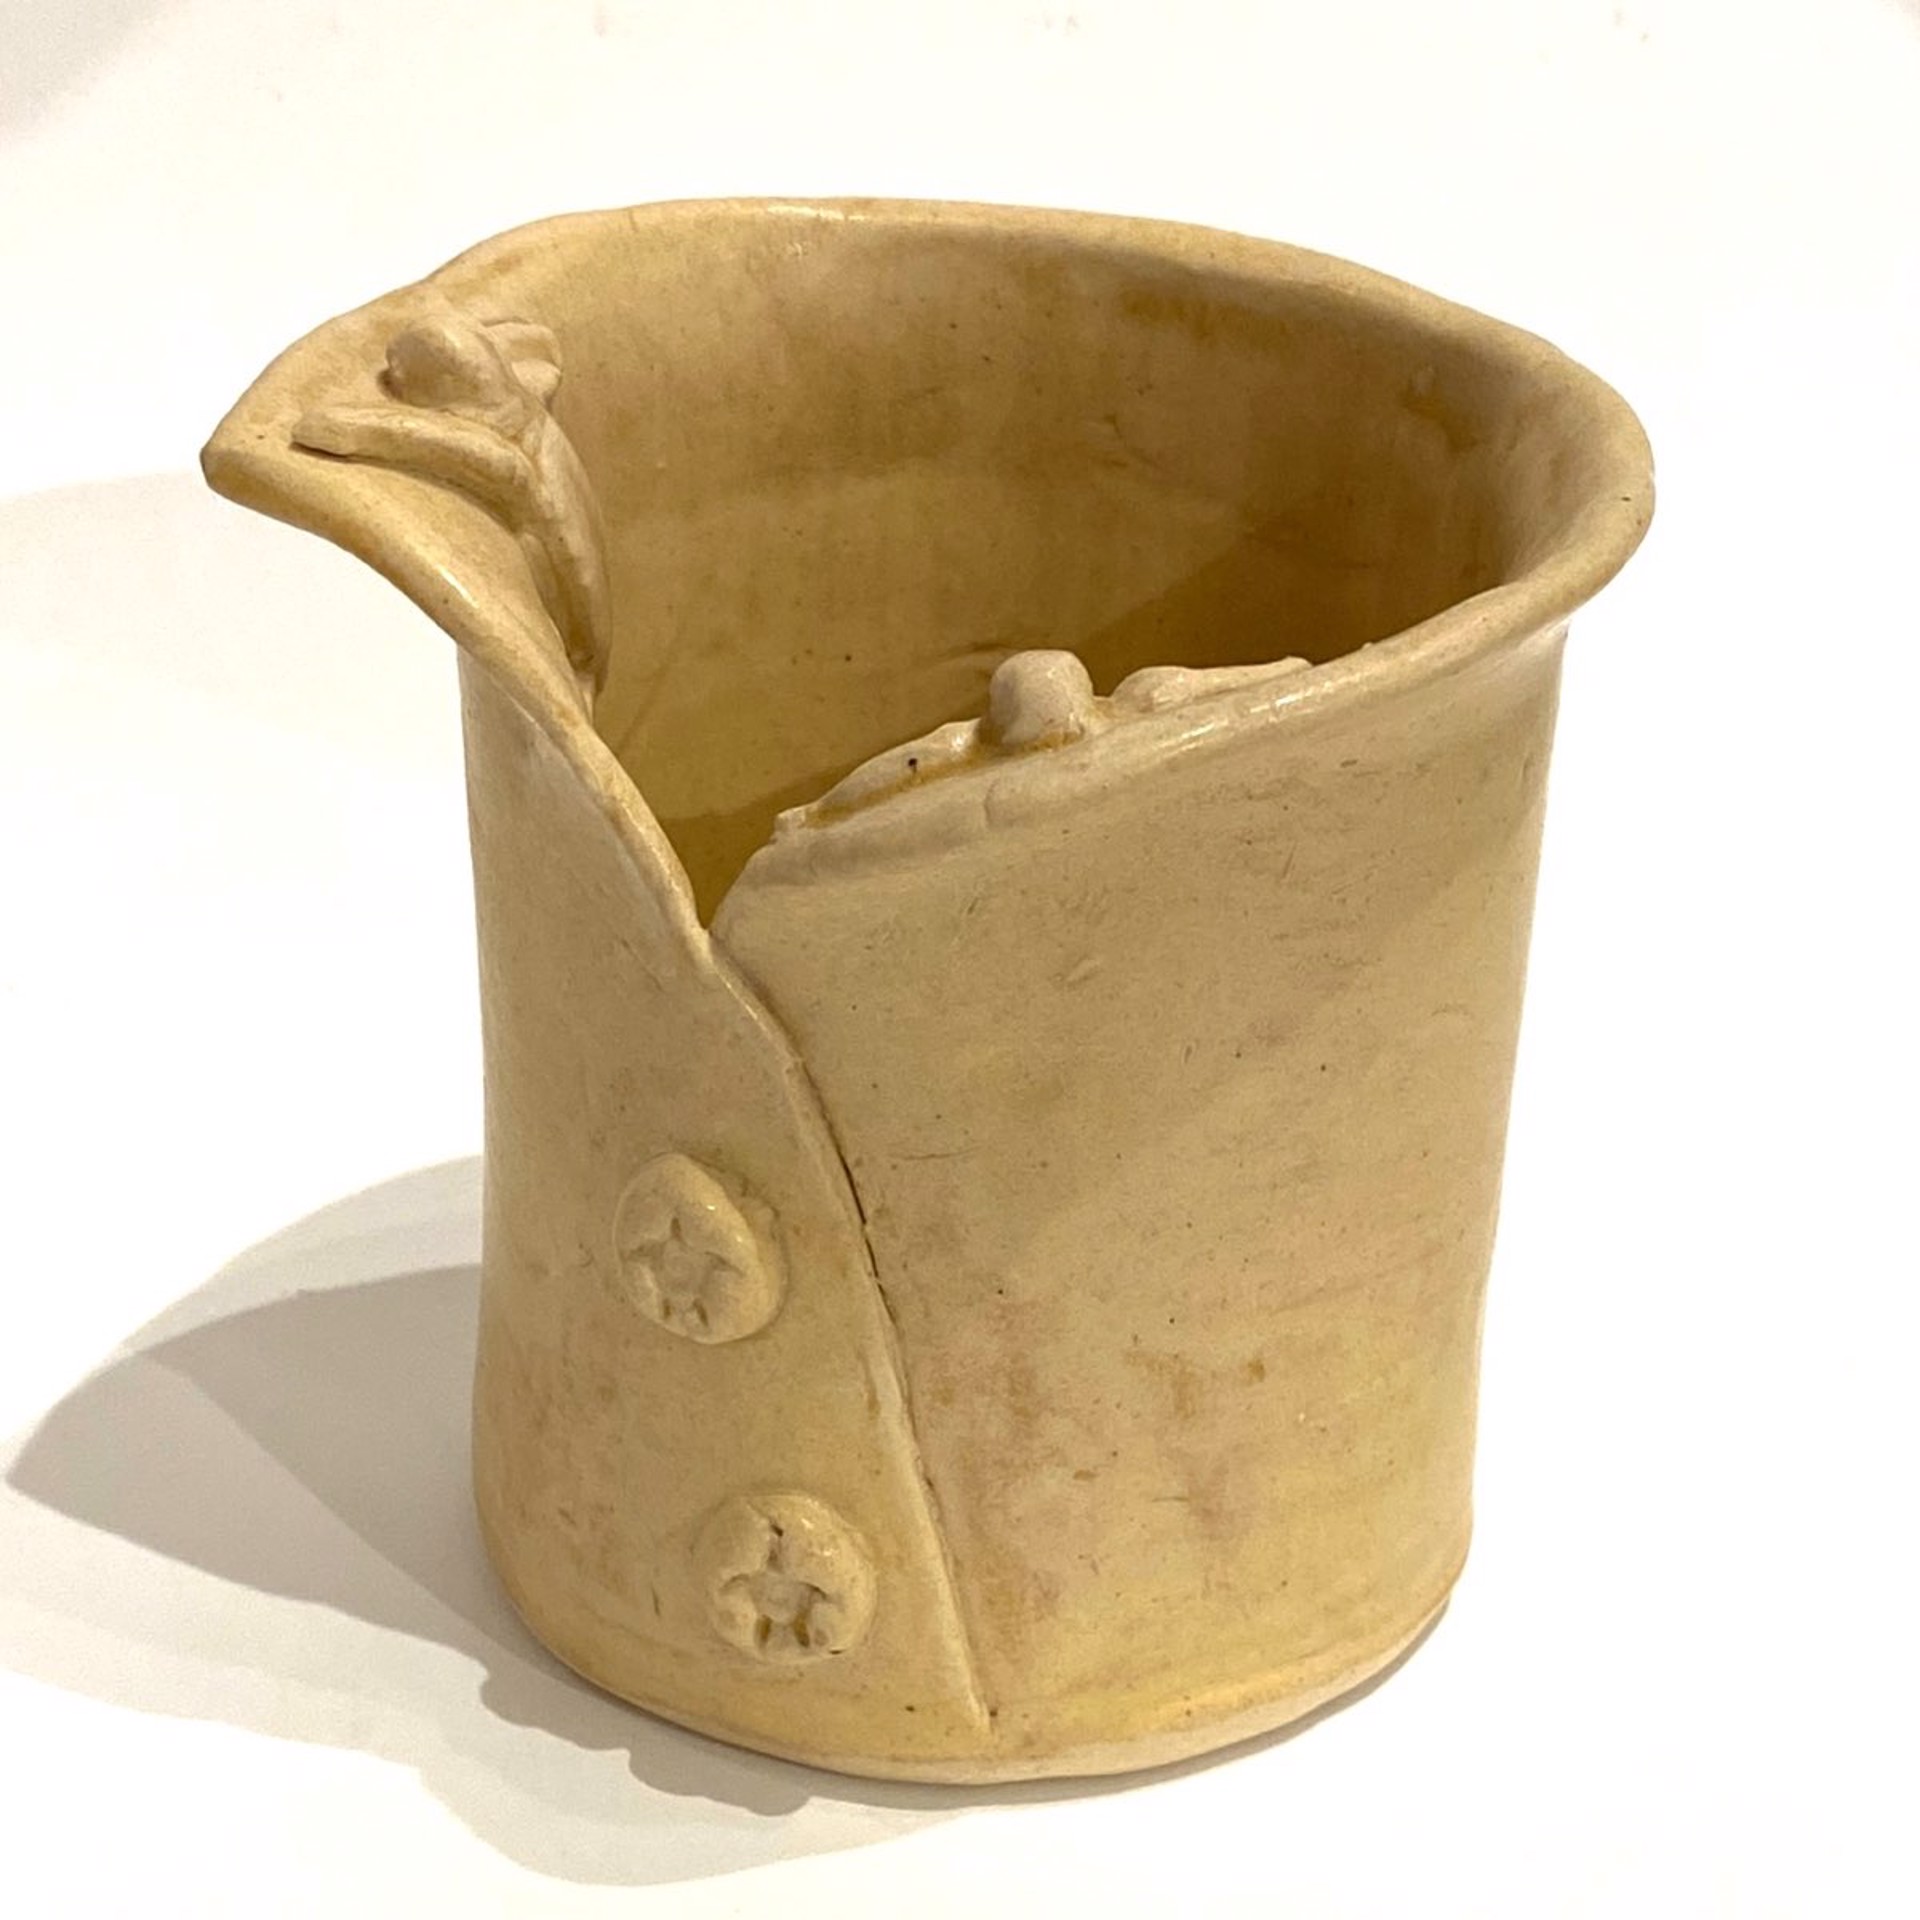 “Shirt” Cup with Turtle Collar and Buttons by Barbara Bergwerf, Ceramics